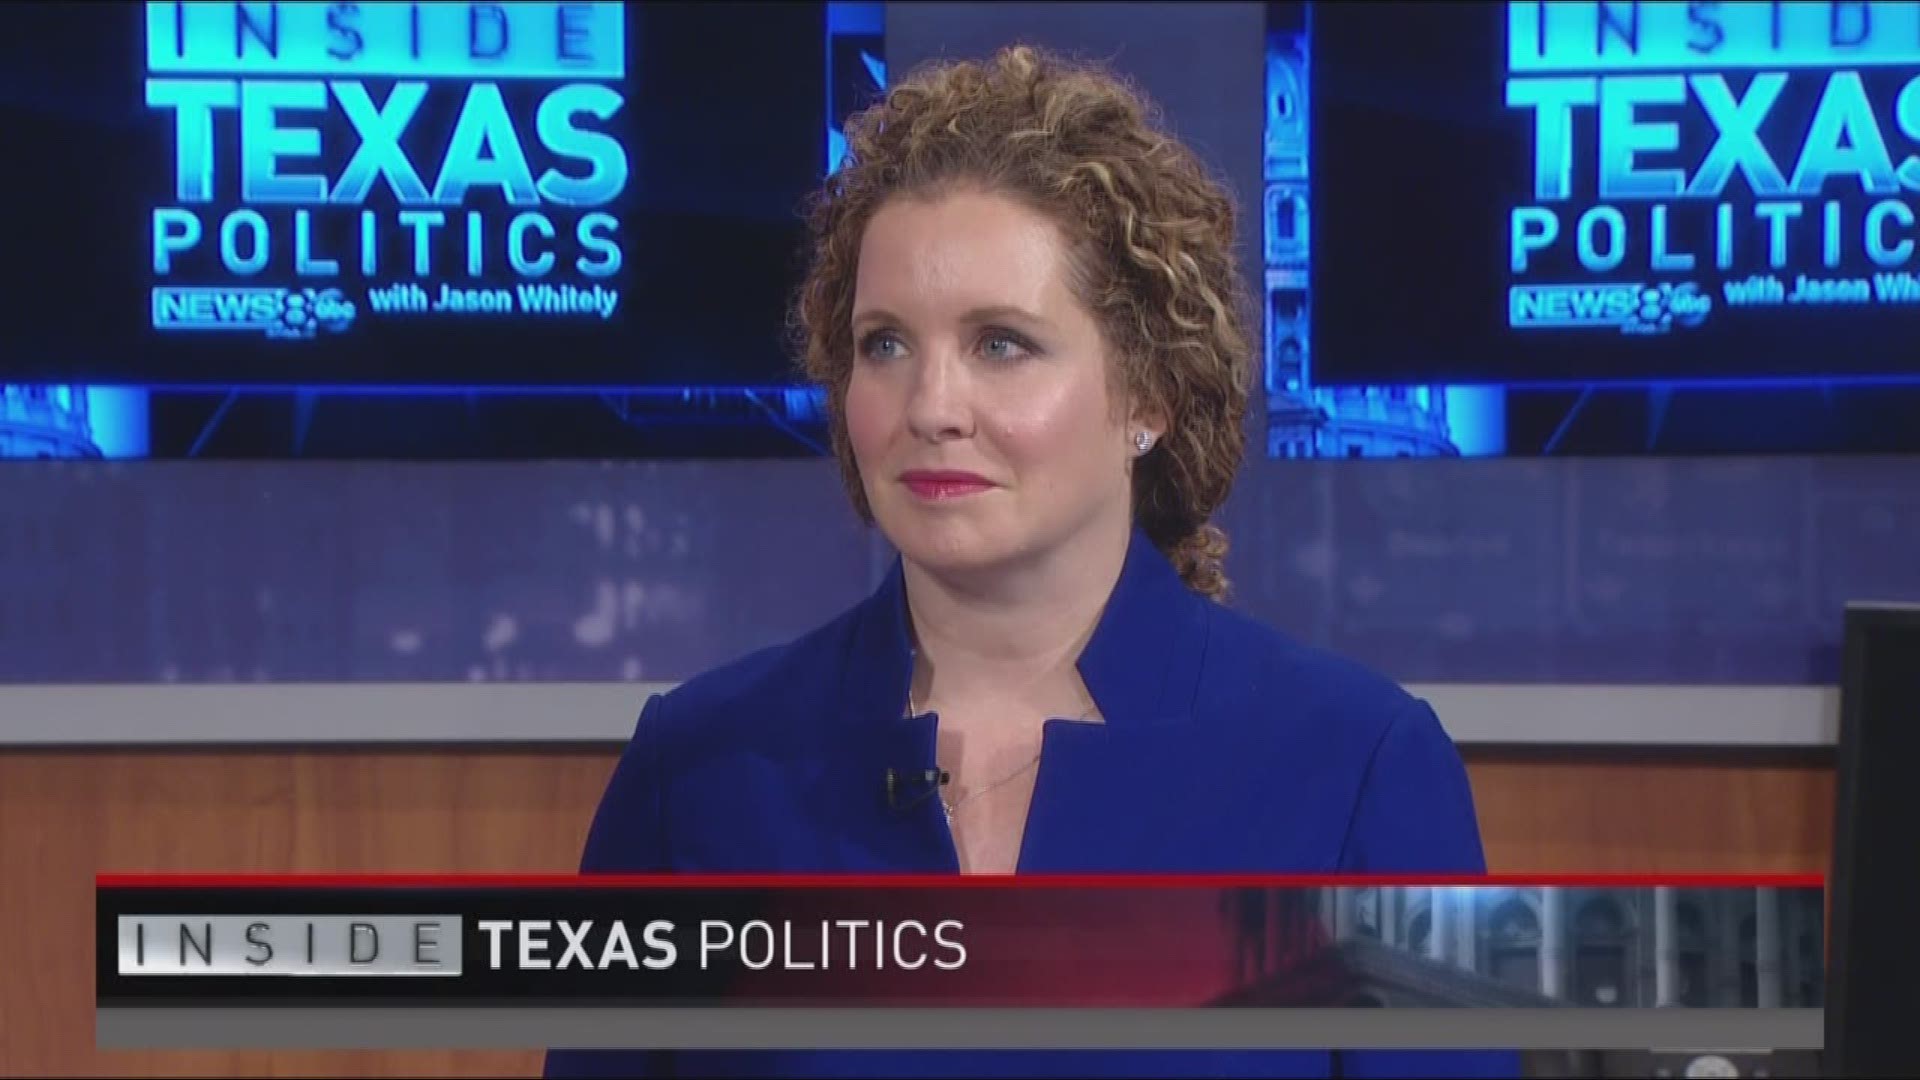 Chair Missy Shorey is the first woman to lead the Dallas County Republican Party. Just months after being elected, she was quick to go after Democrats. Shorey sued in January to get over 120 Democratic candidates thrown off the ballot - saying the party c